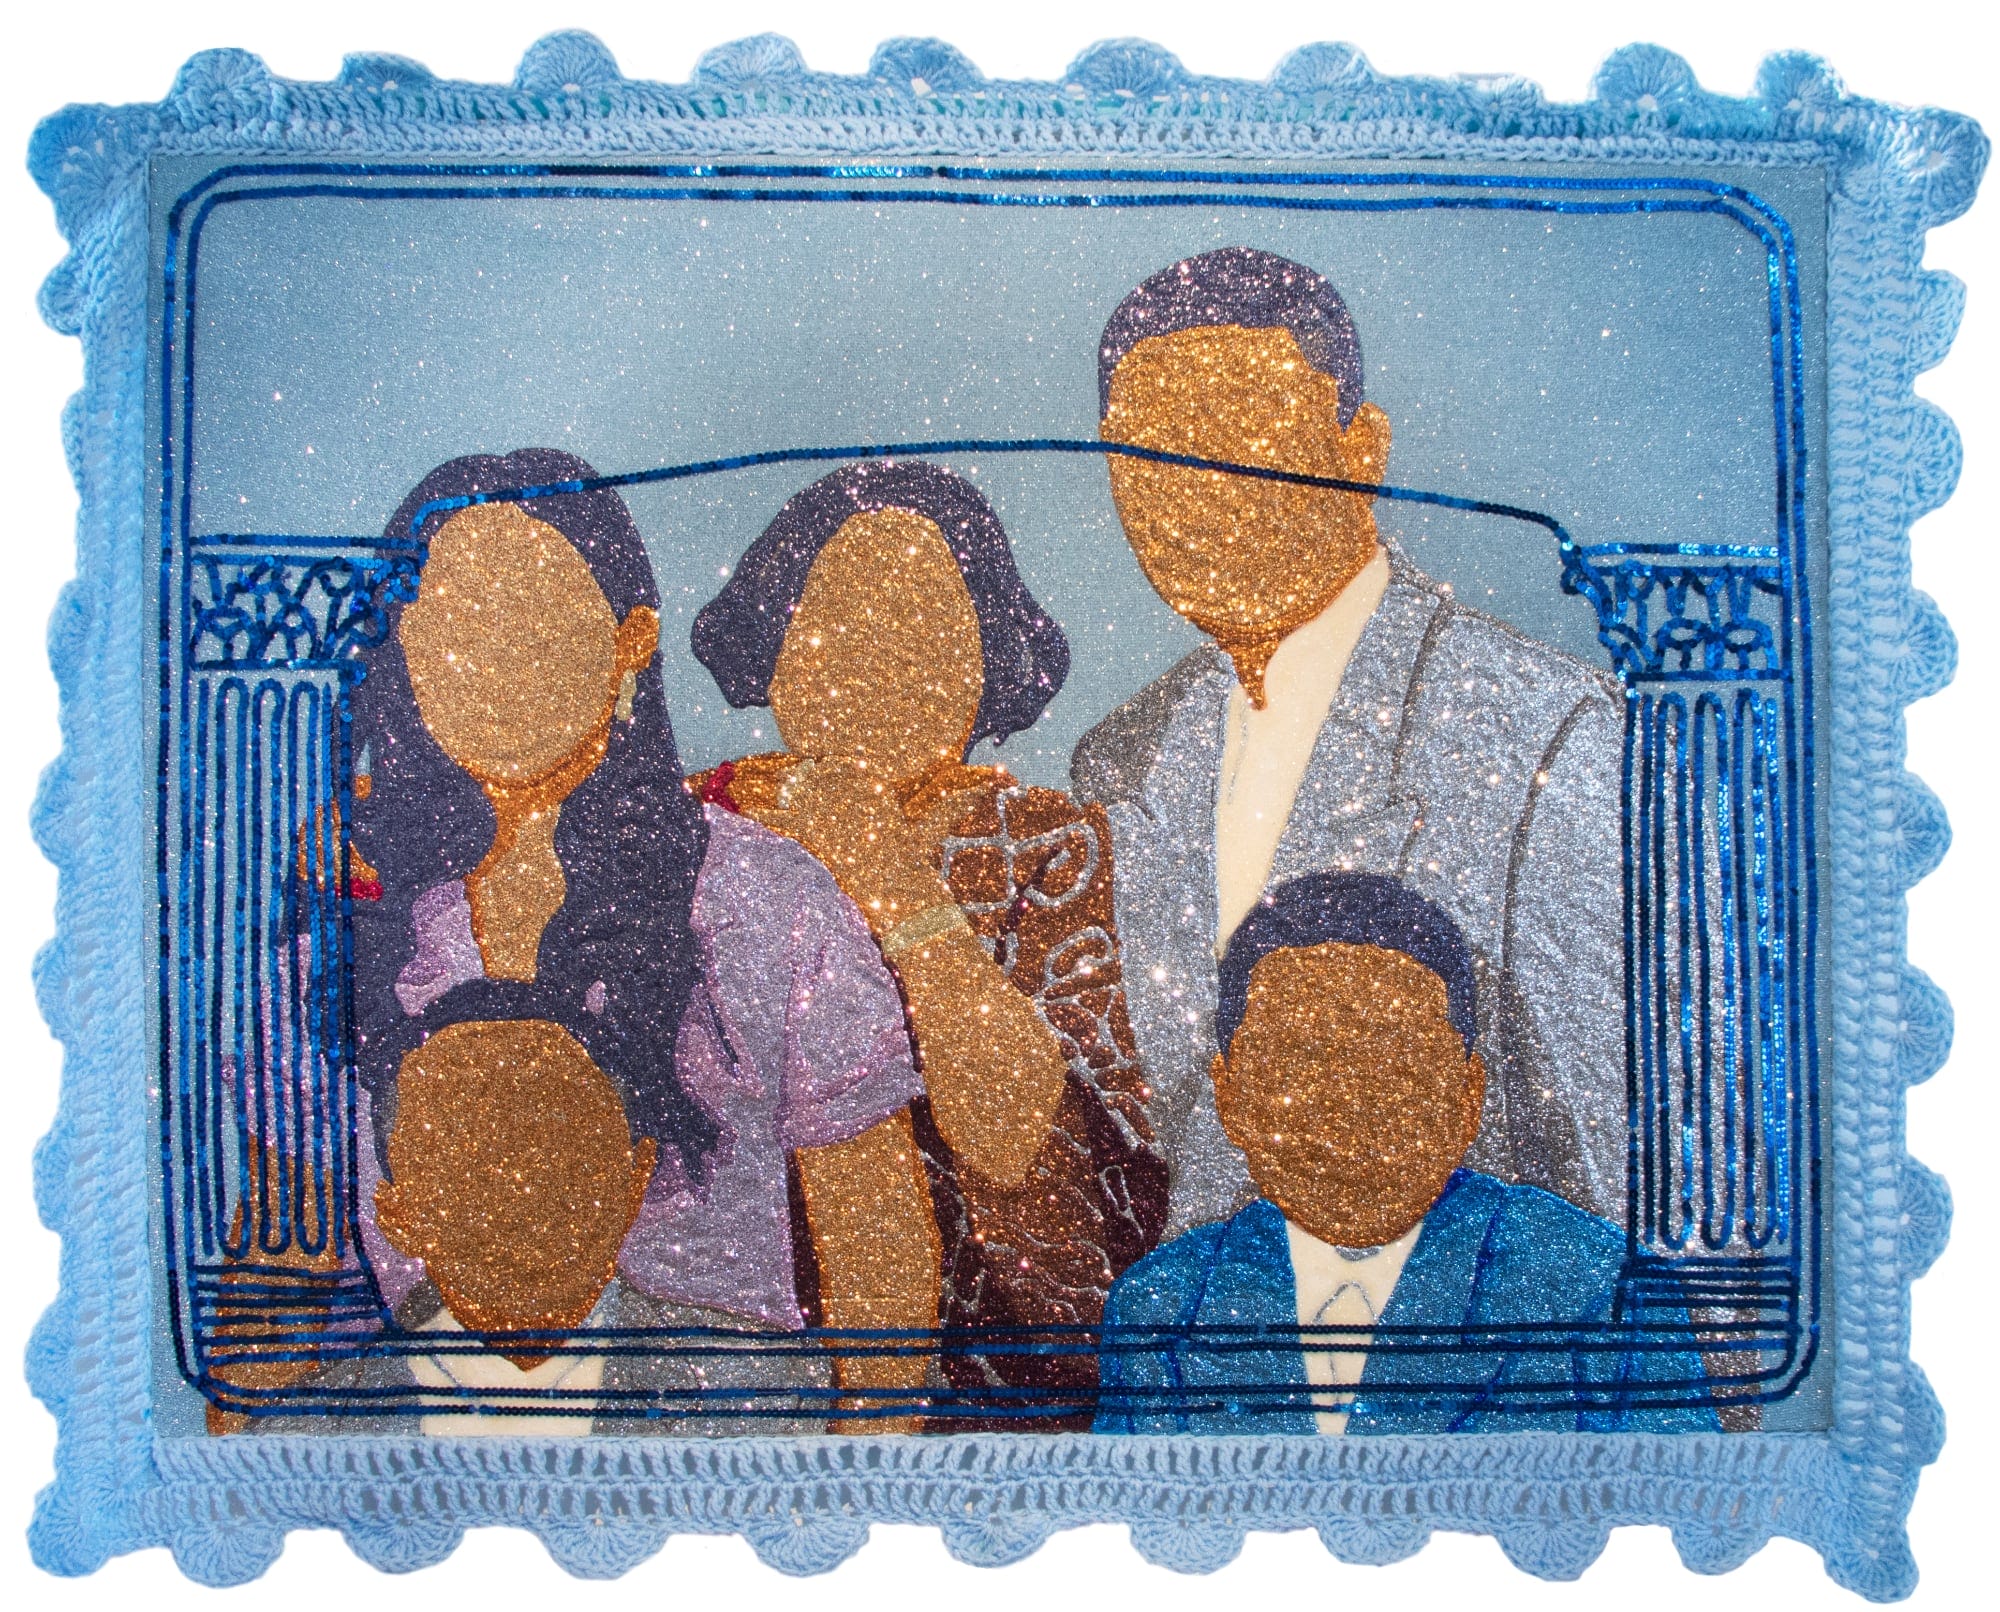 a family portrait of faceless figures rendered in glitter. a blue crocheted frame surrounds them